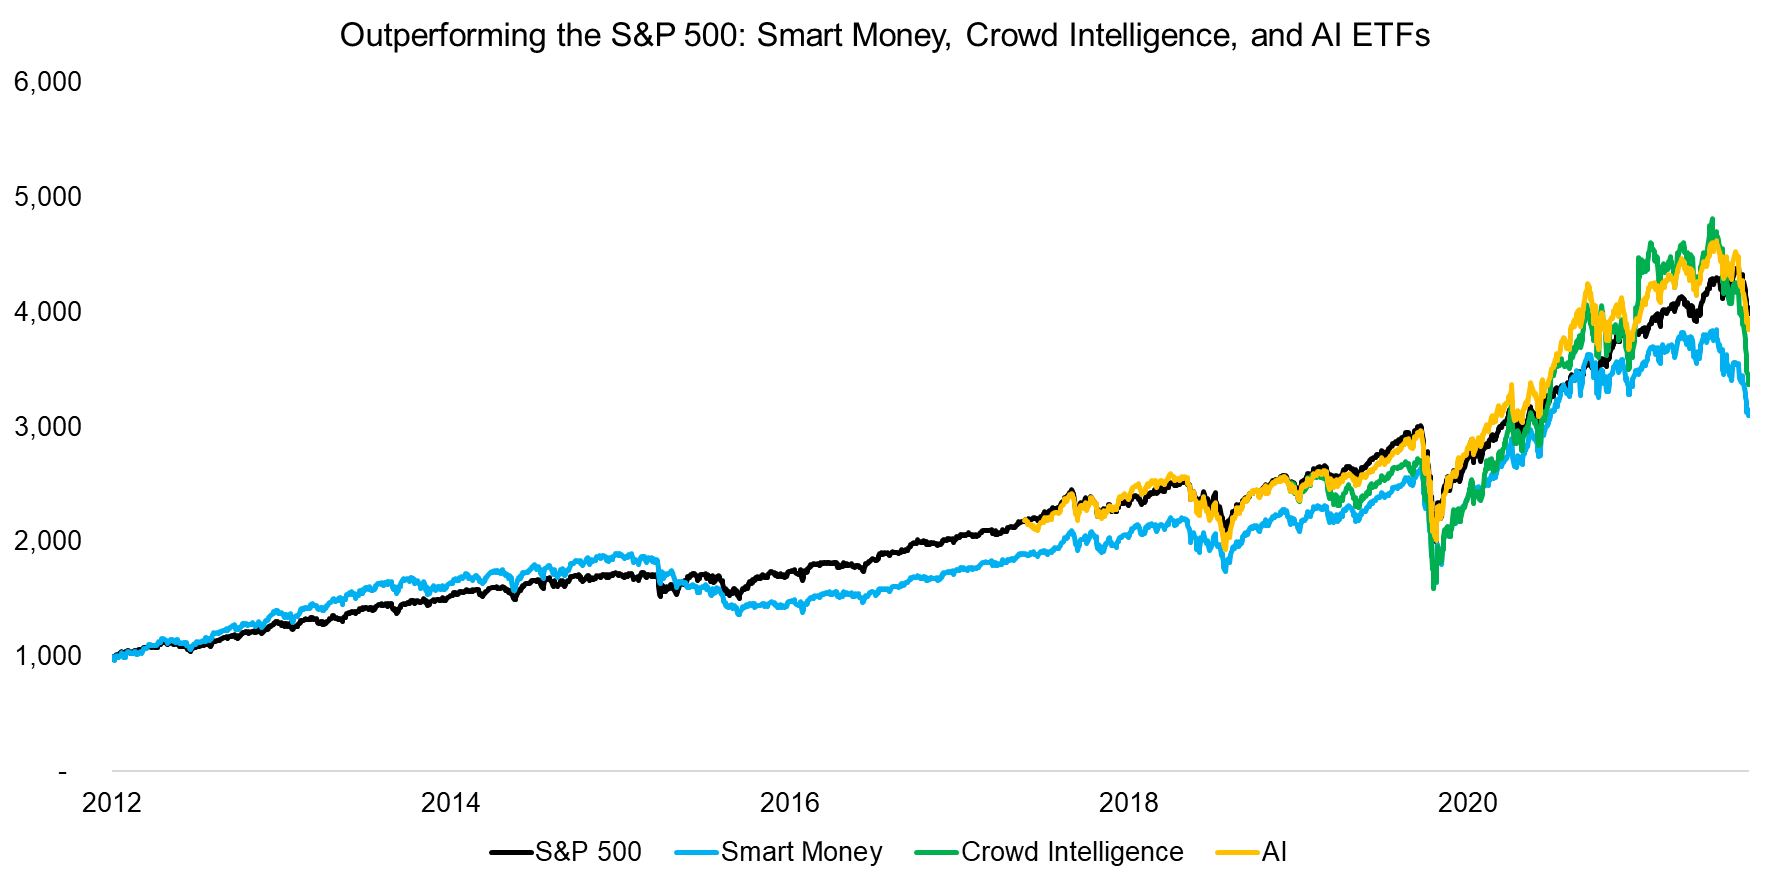 Outperforming the S&P 500 Smart Money, Crowd Intelligence, and AI ETFs